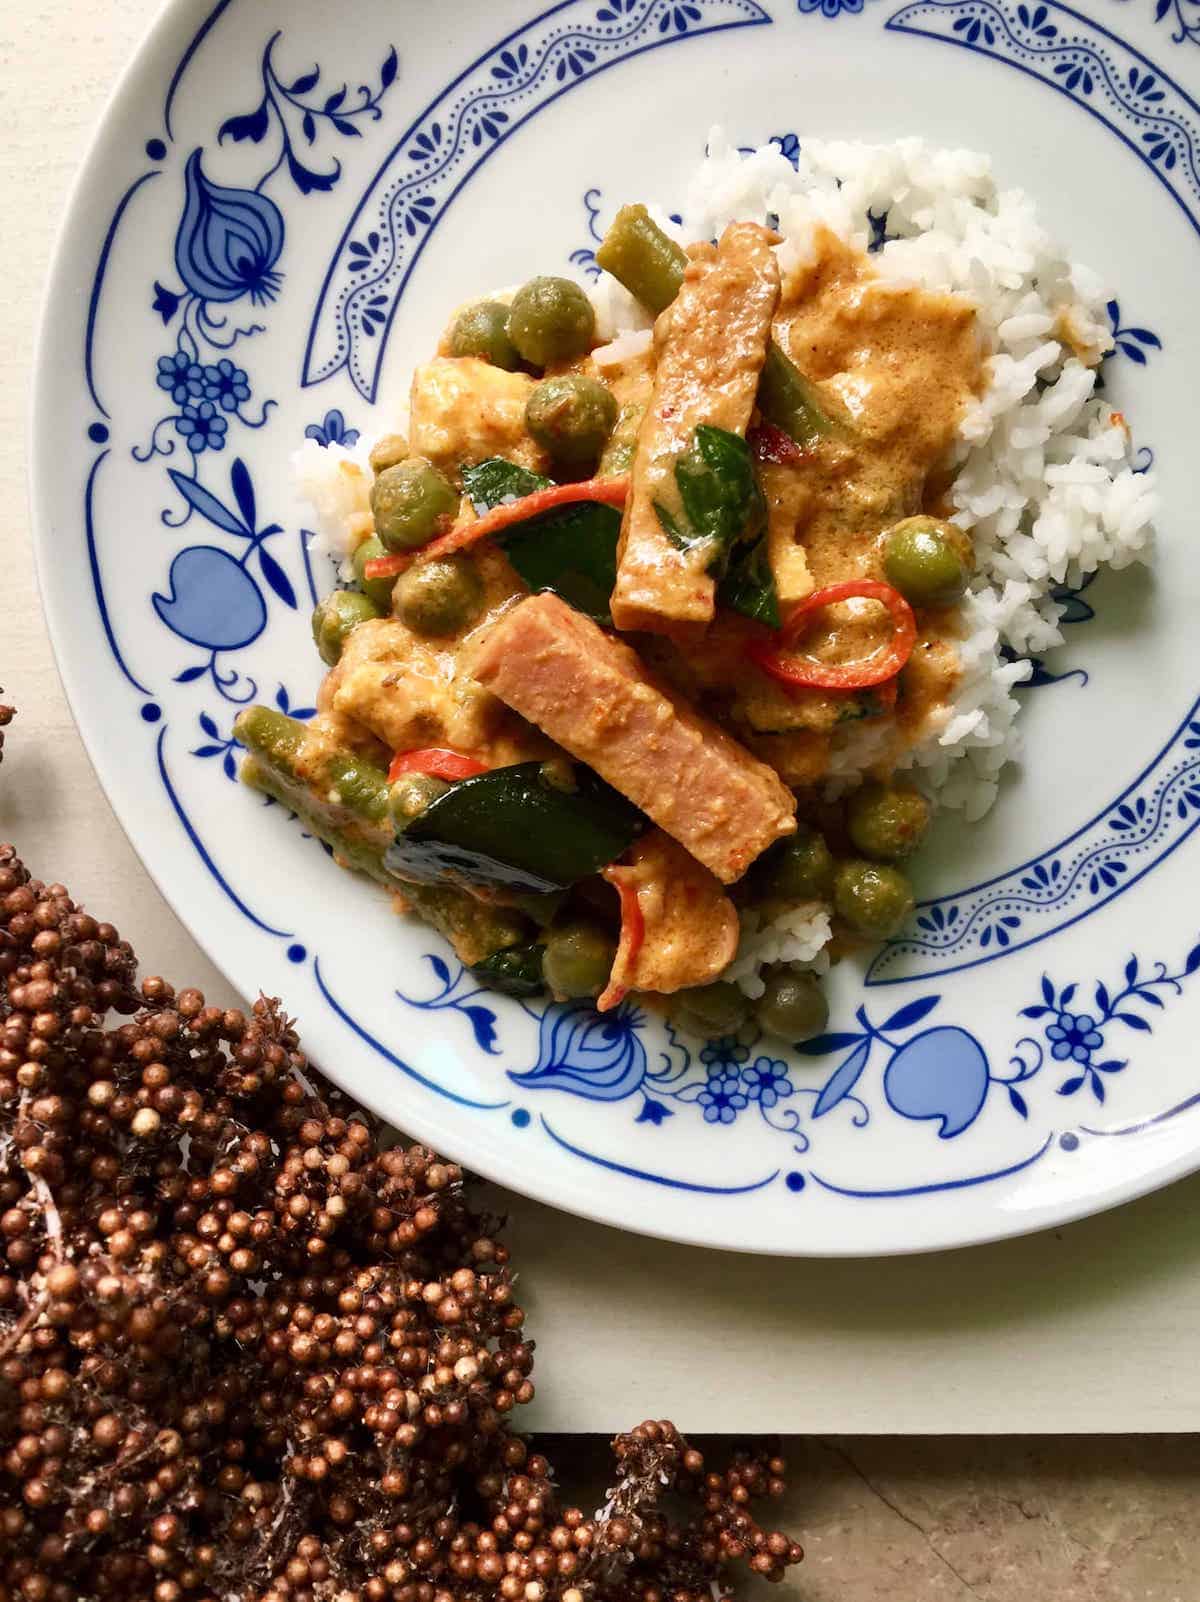 Thai-inspired curry with pea eggplants and pork, scooped over rice.